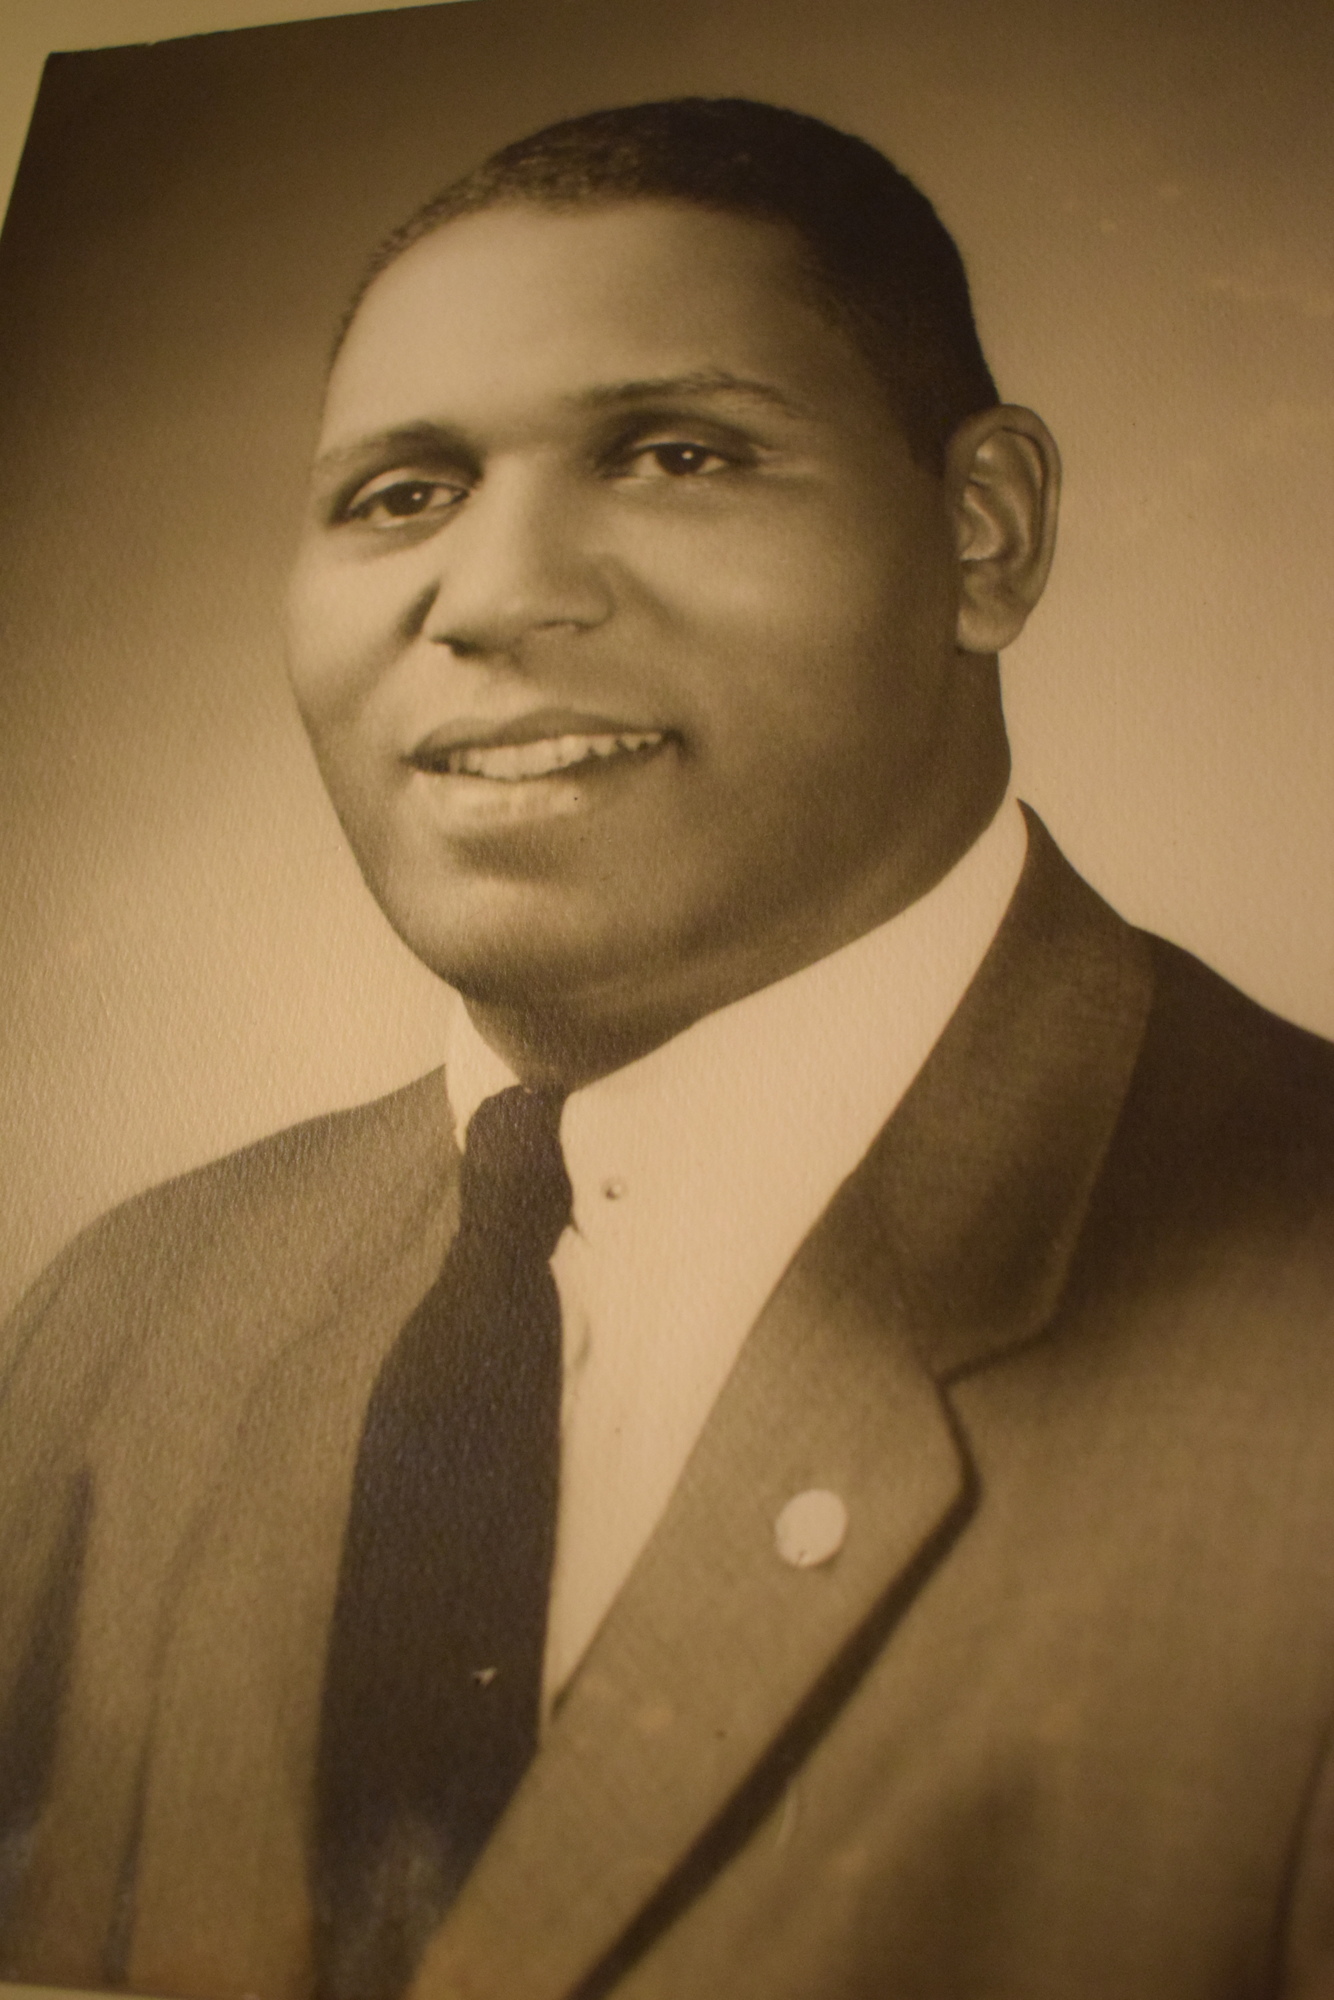 Leon Harris Jr. started working for unions in the 1950s in Providence, Rhode Island.